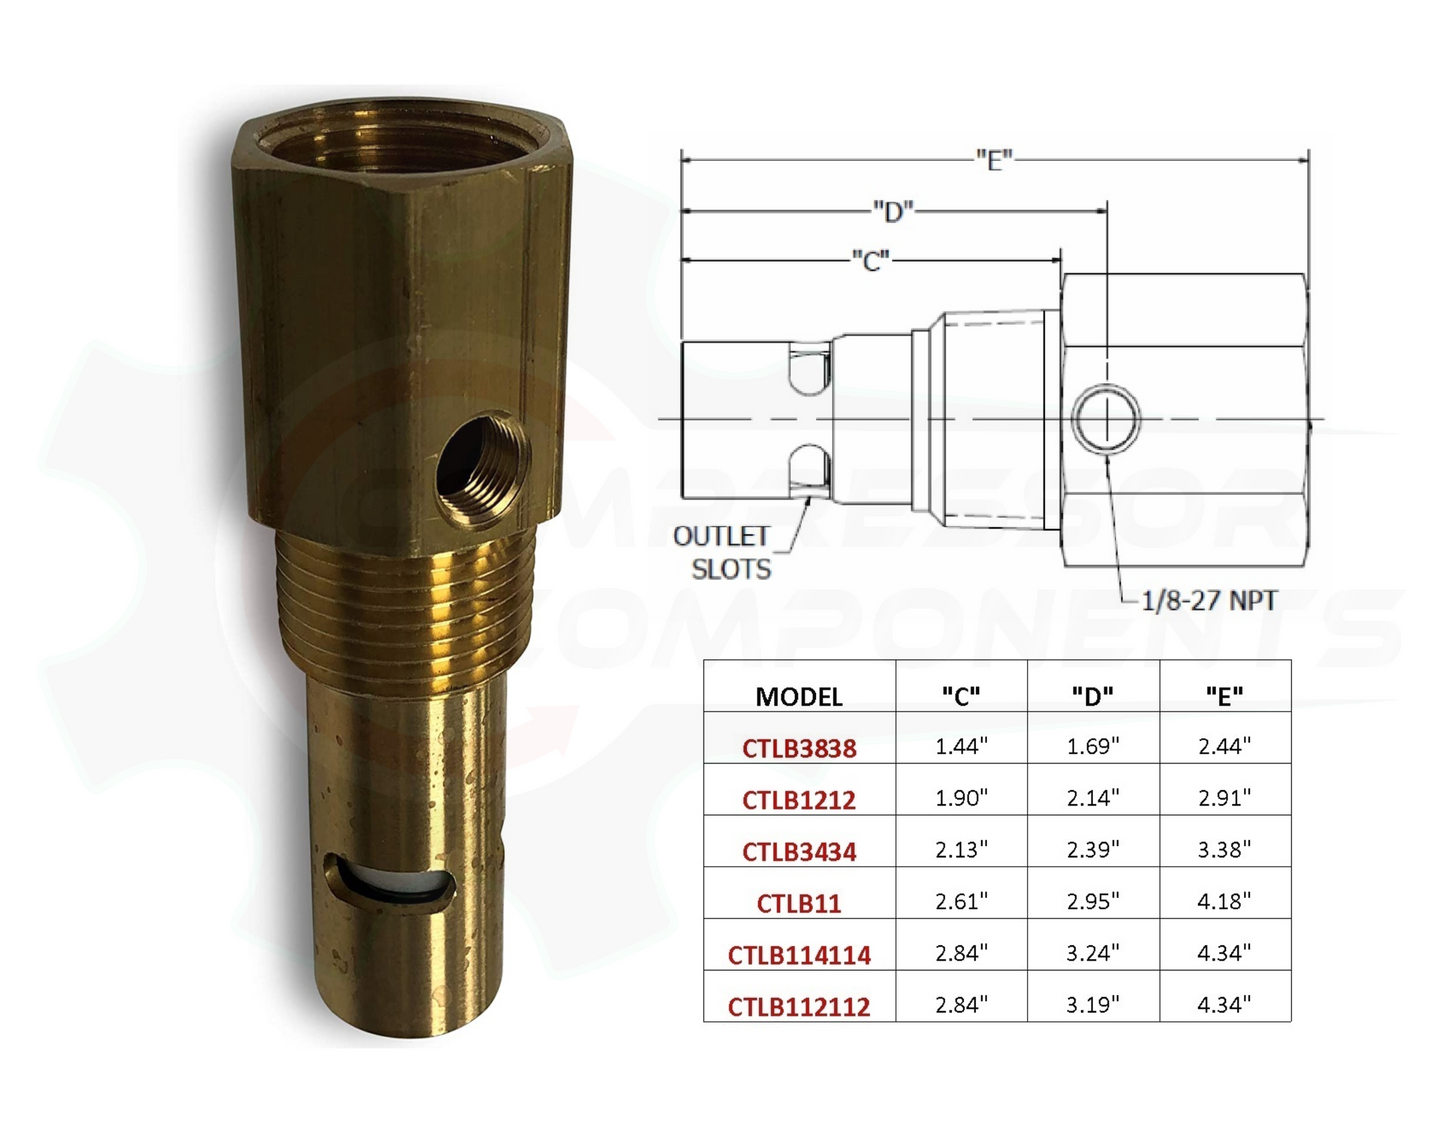 DISCHARGE IN TANK CHECK VALVE 1/2" FNPT INLET x 1/2" MNPT OUTLET W\ DOUBLE 1/8" FNPT UNLOADER PORTS